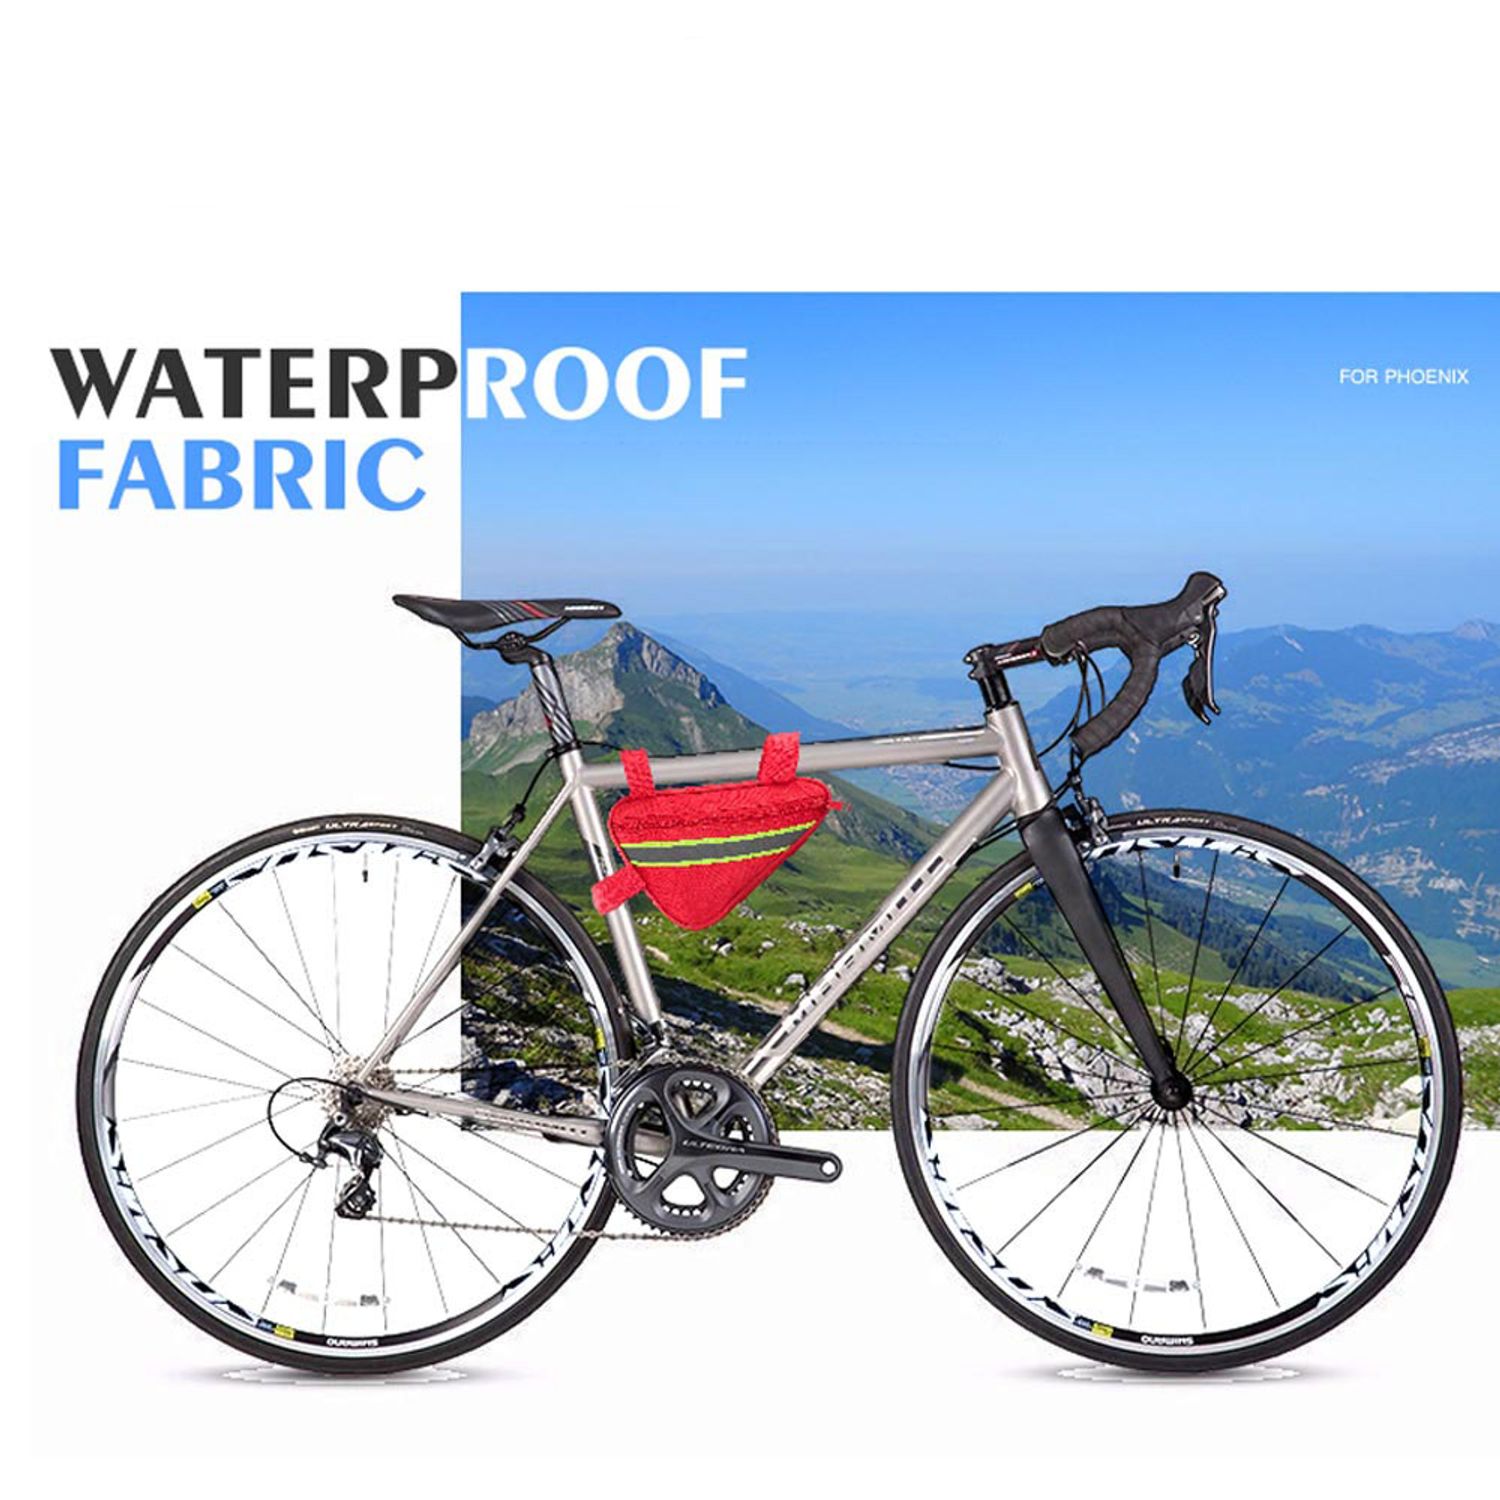 Waterproof fabric of Risen cyclist survival kit for mountain bike